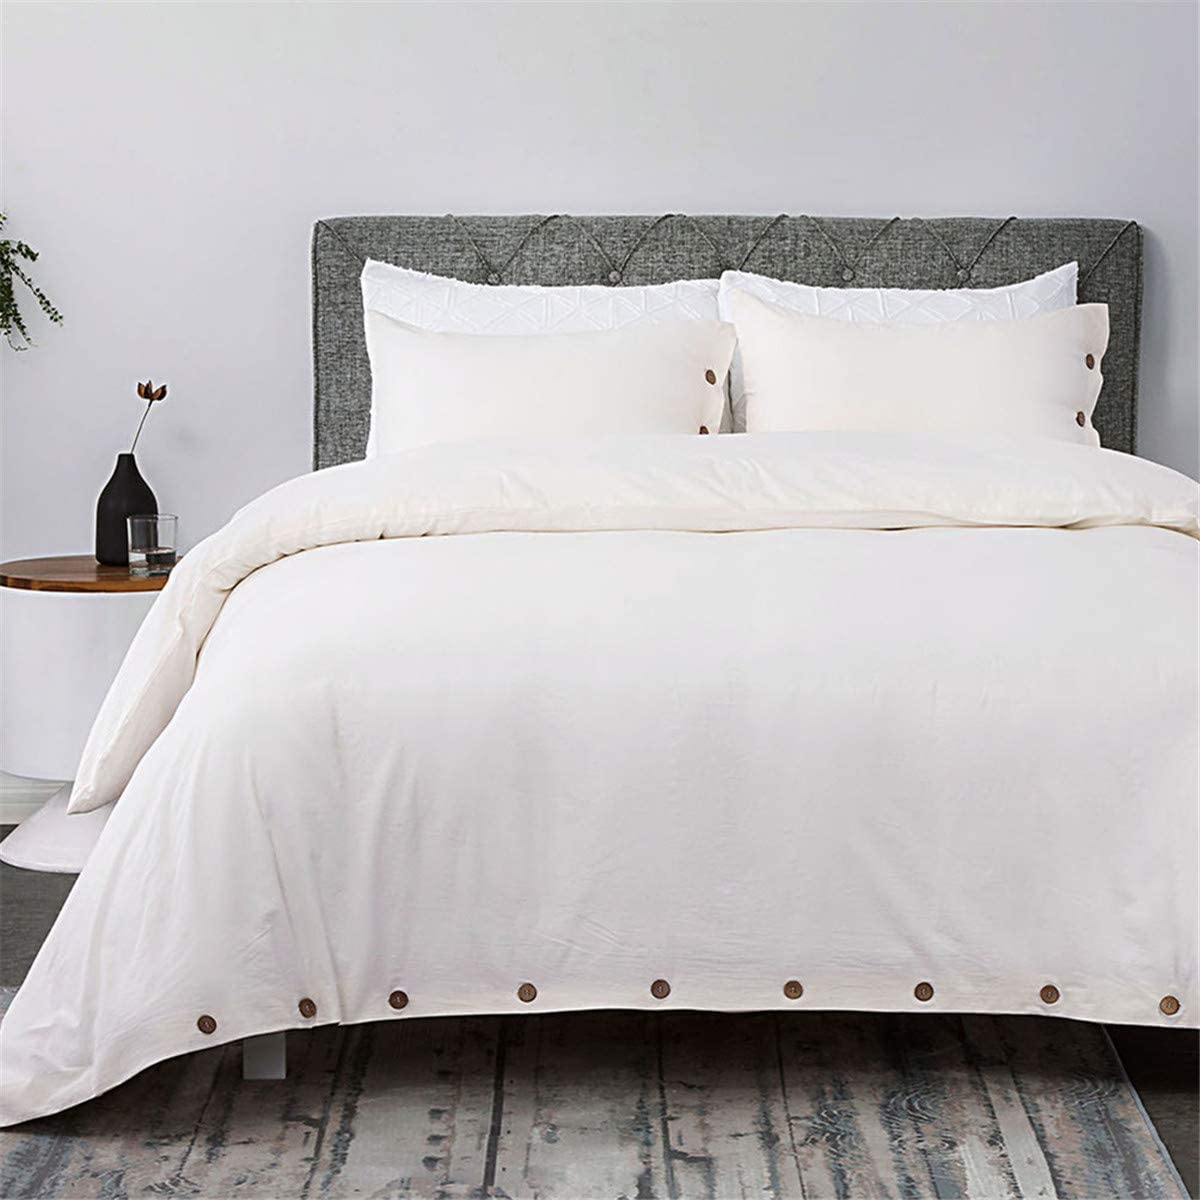 Bedsure 100% Washed Cotton Duvet Cover Sets Queen Full Size White ...